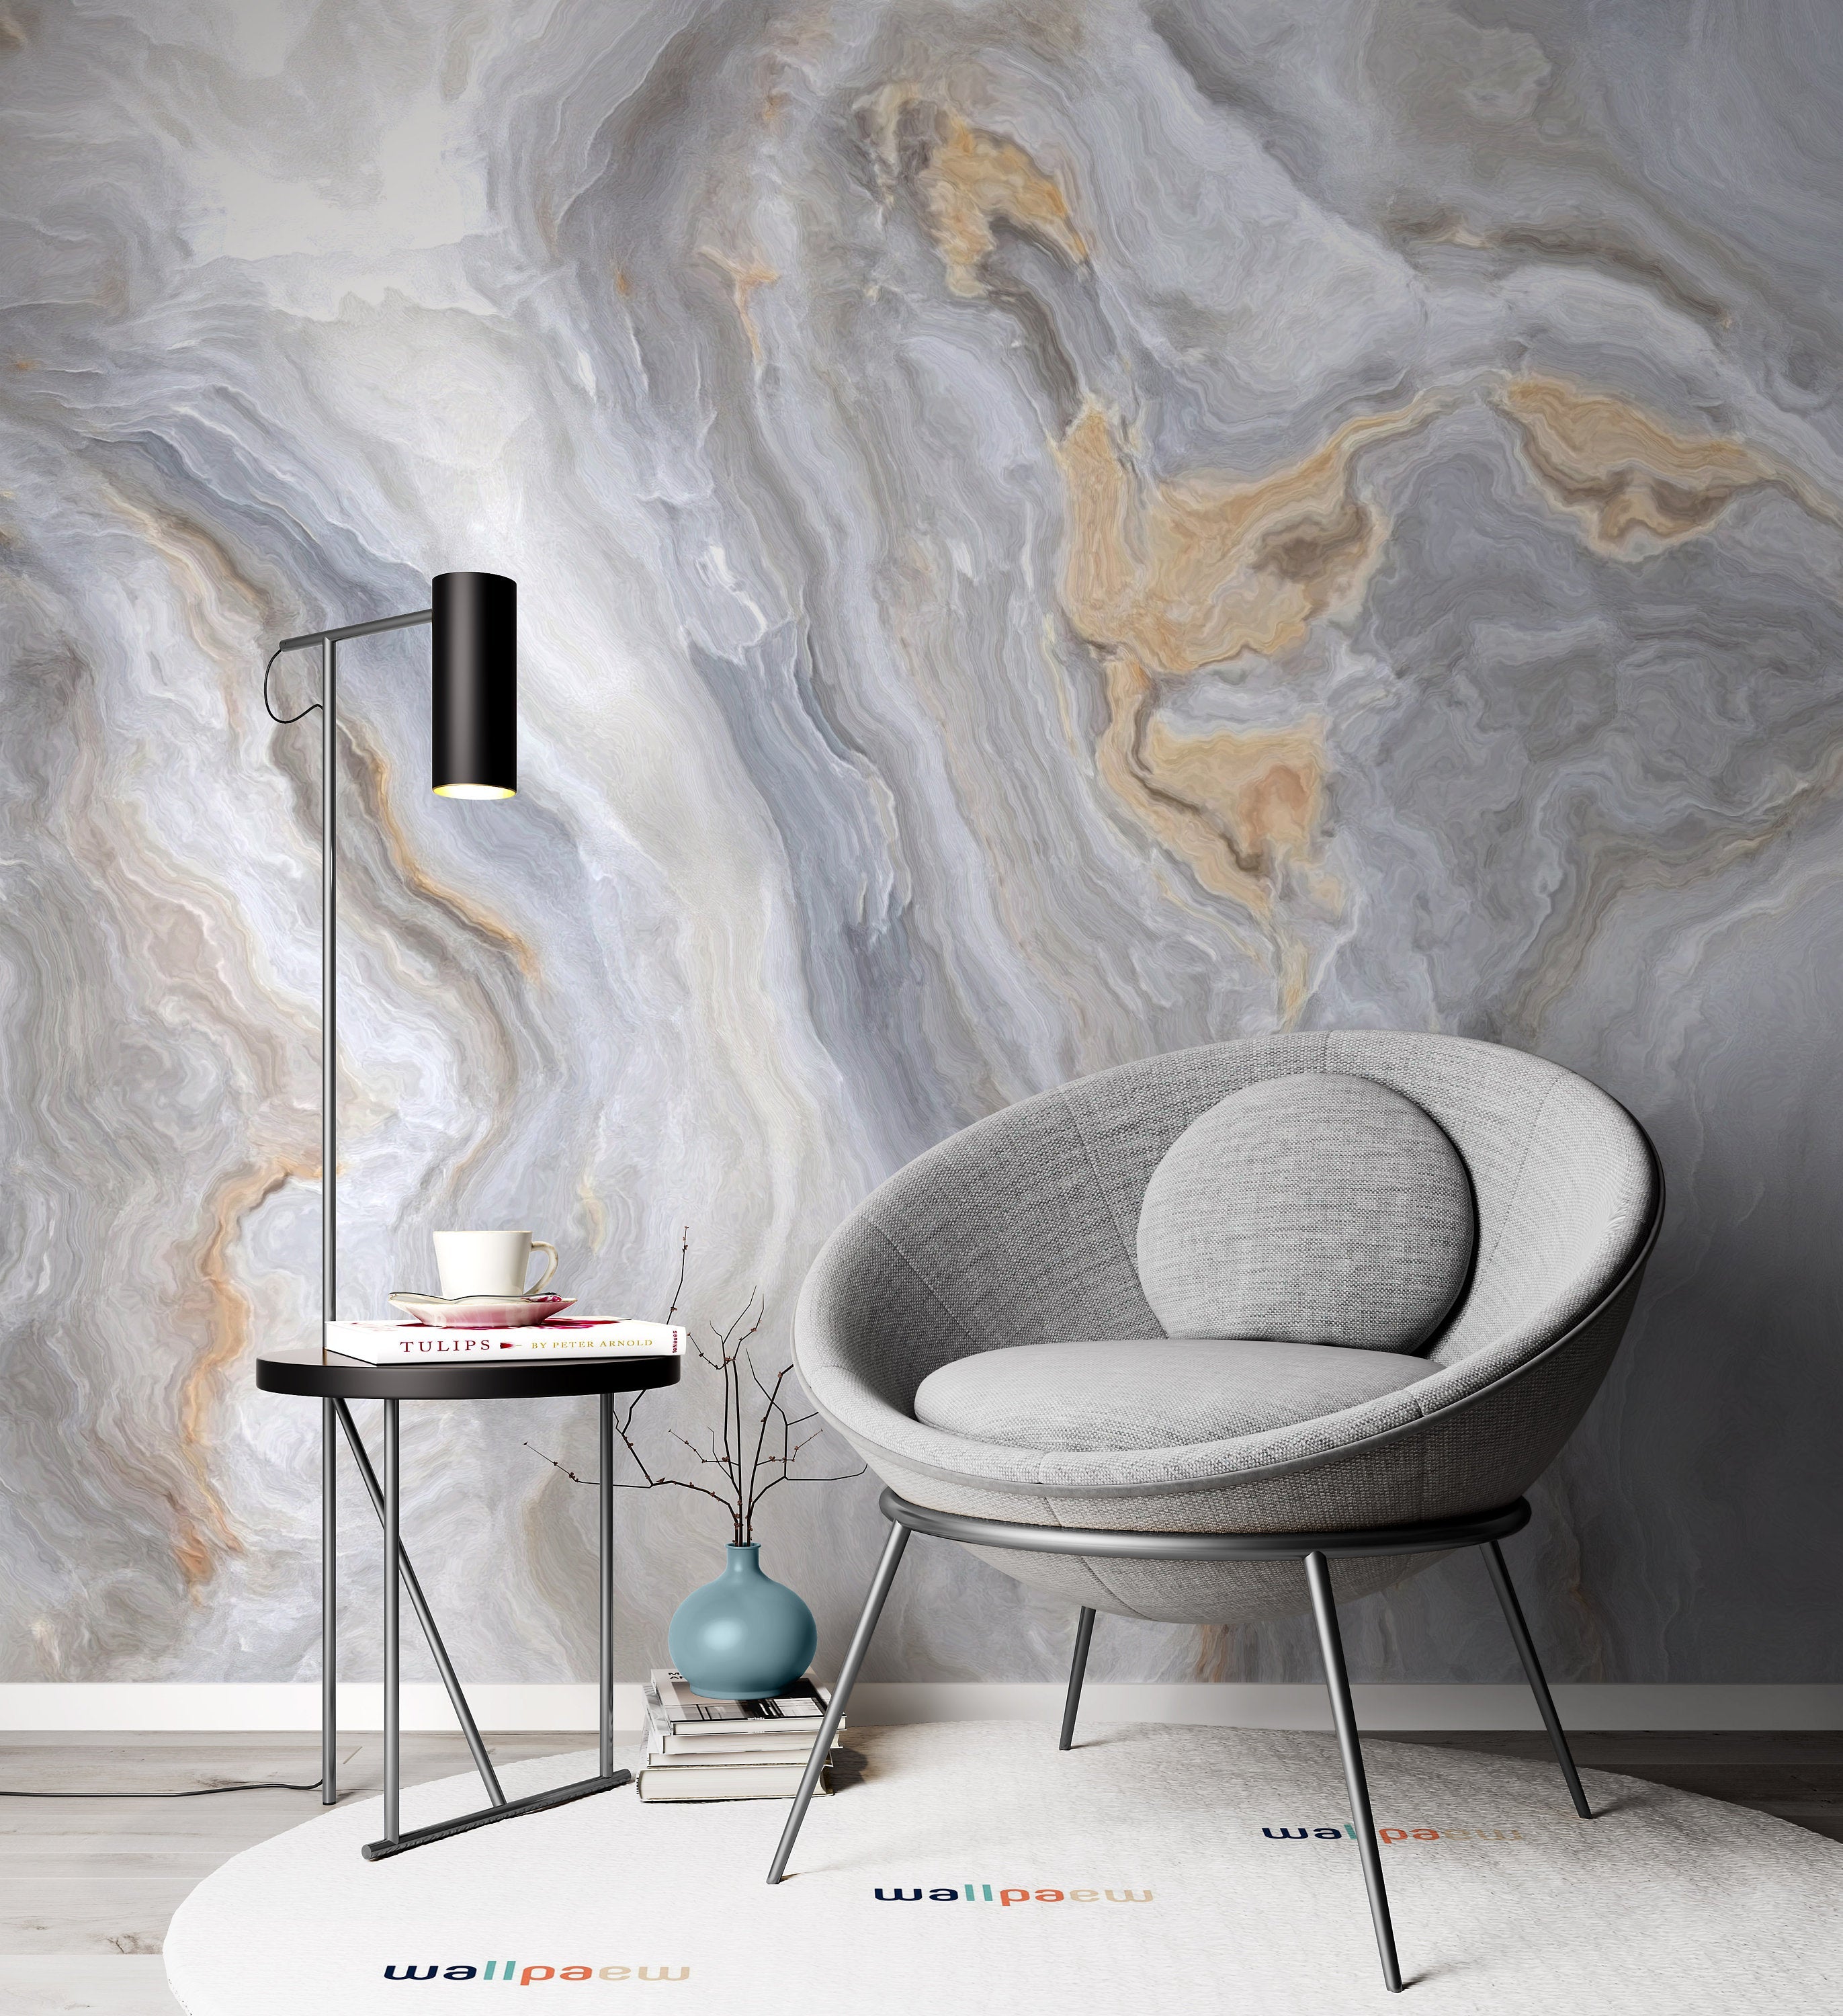 Beautiful Grey Curly Marble Golden Veins Abstract Wallpaper Bathroom Restaurant Bedroom Living Room Cafe Office Mural Home Decor Wall Art